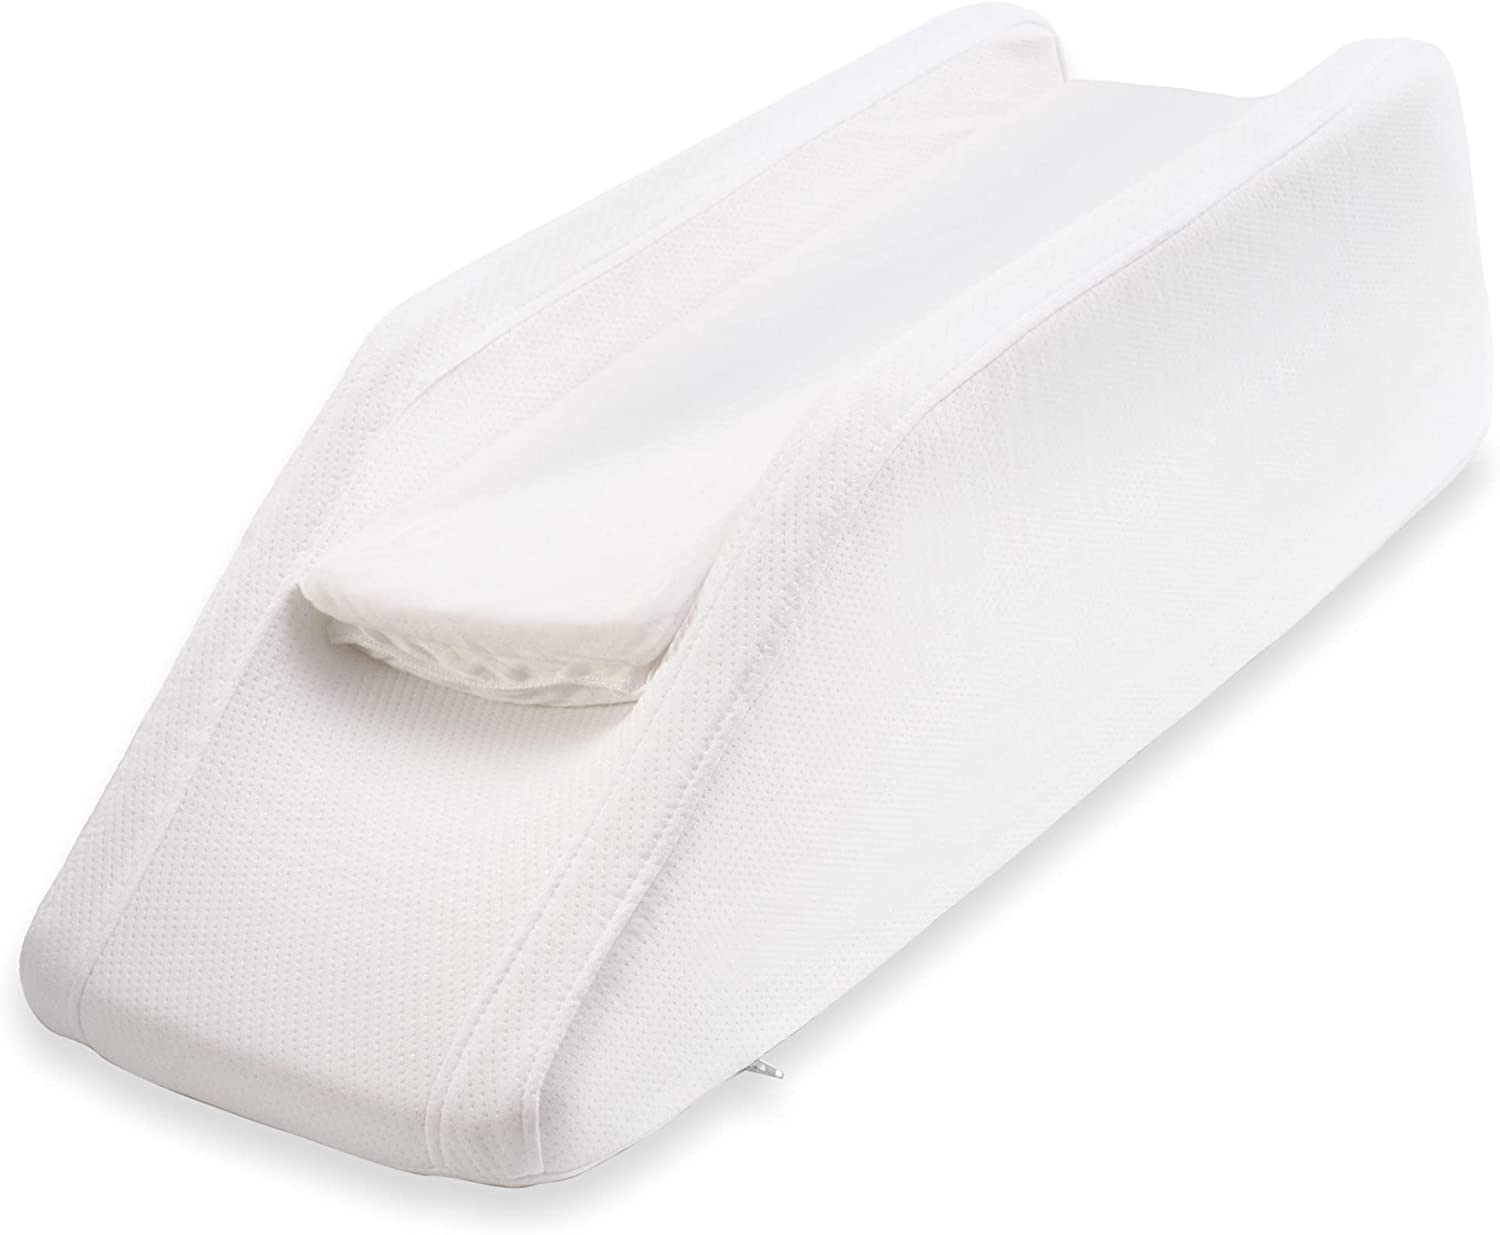 LightEase Memory Foam Leg Support and Elevation Pillow w/Dual Handles for  Surgery, Injury, or Rest